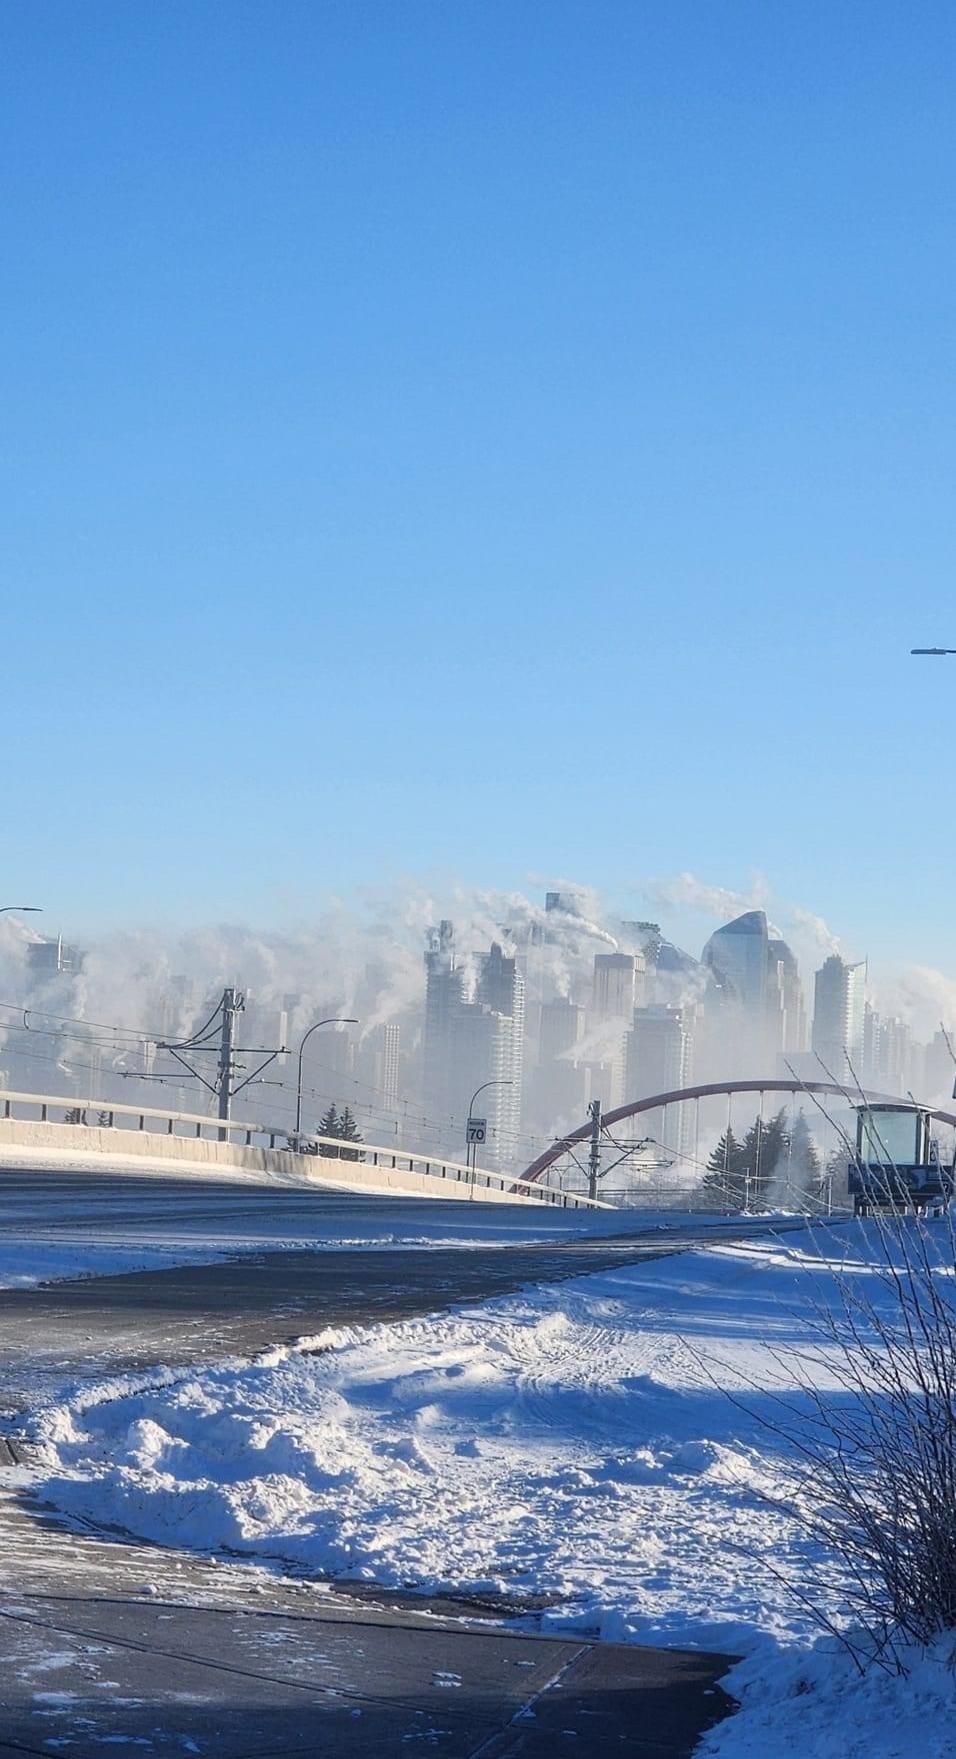 Mist/fog/smoke rising above skyscrapers in the background, with a snowy highway in the foreground